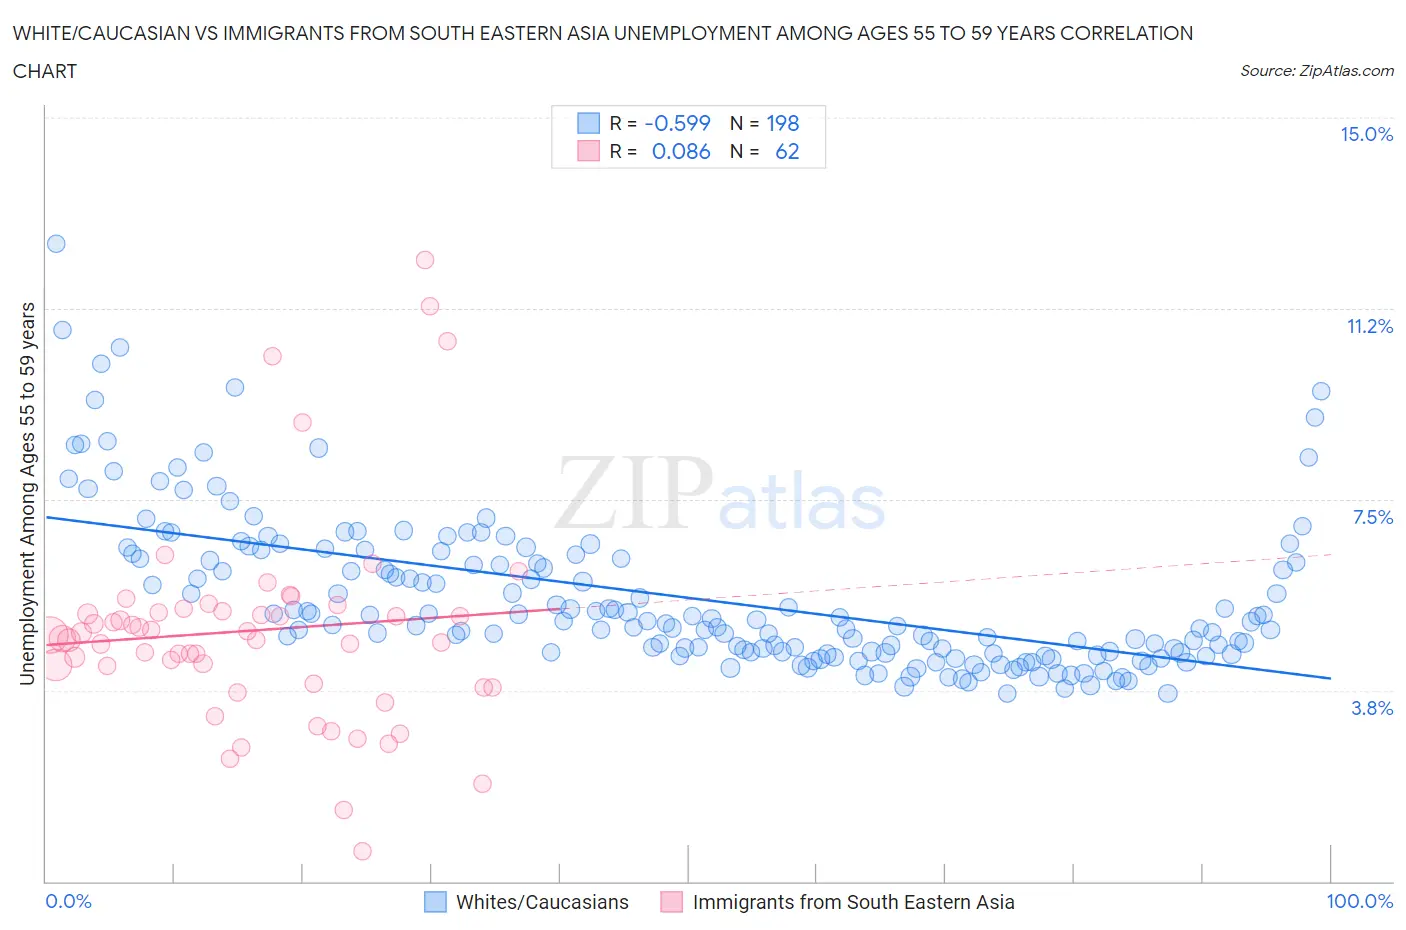 White/Caucasian vs Immigrants from South Eastern Asia Unemployment Among Ages 55 to 59 years